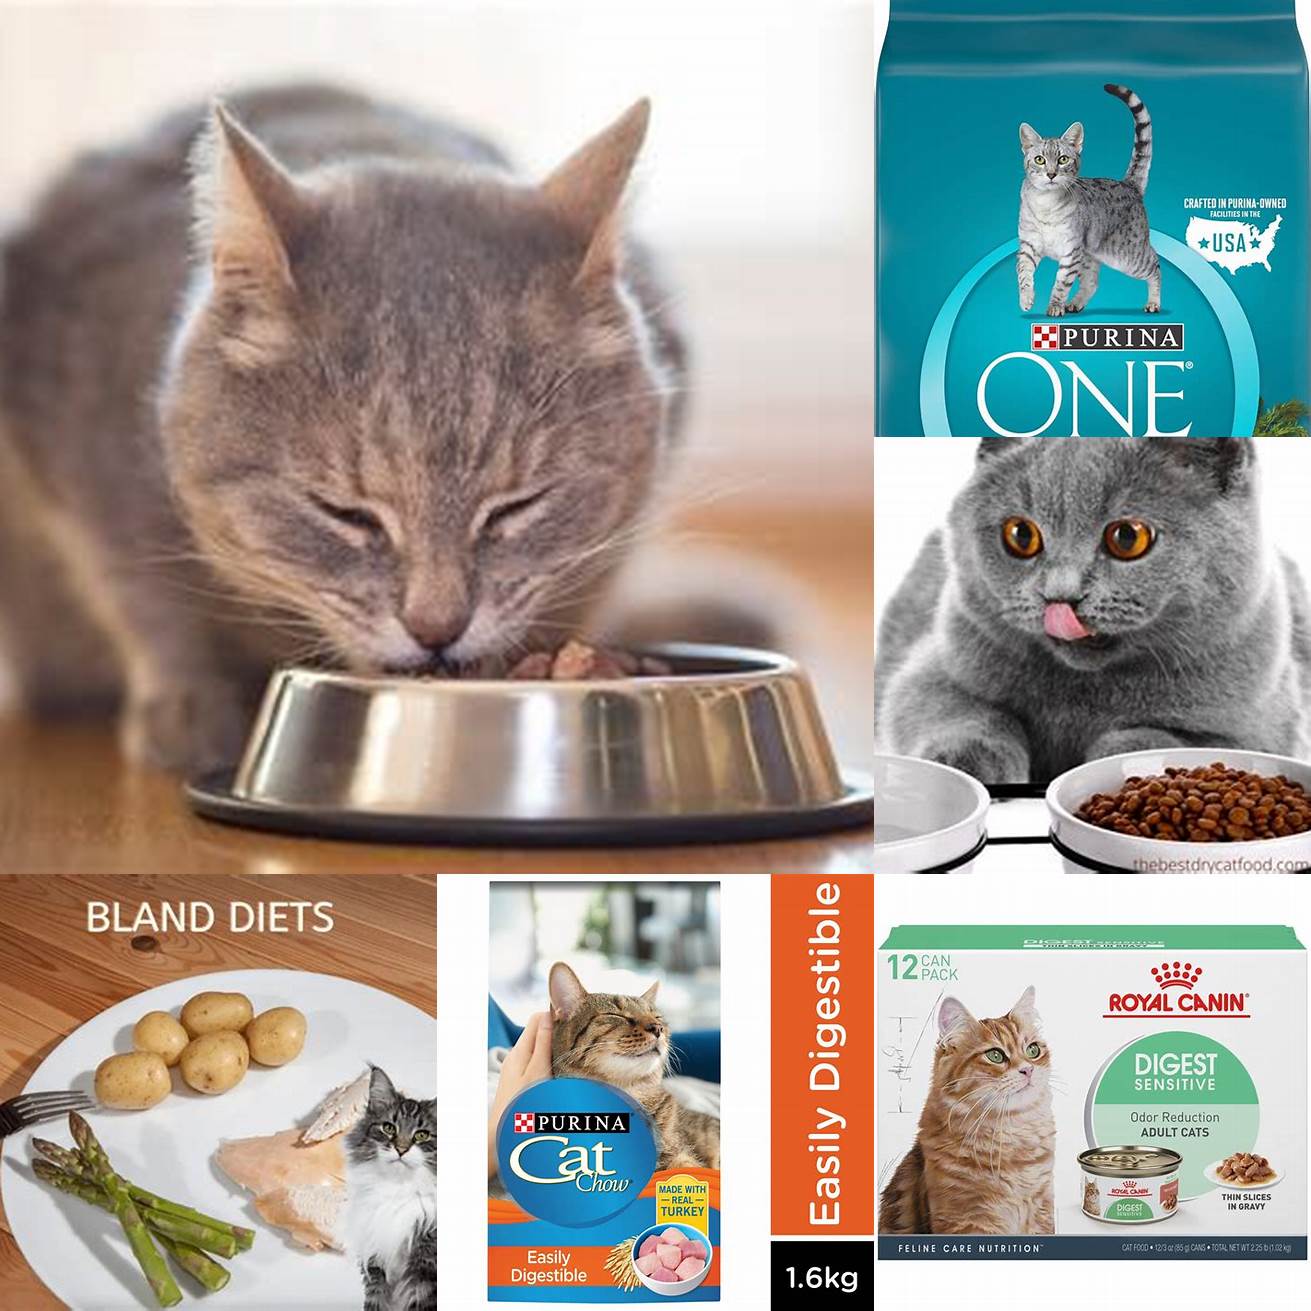 Feeding your cat soft easily digestible food